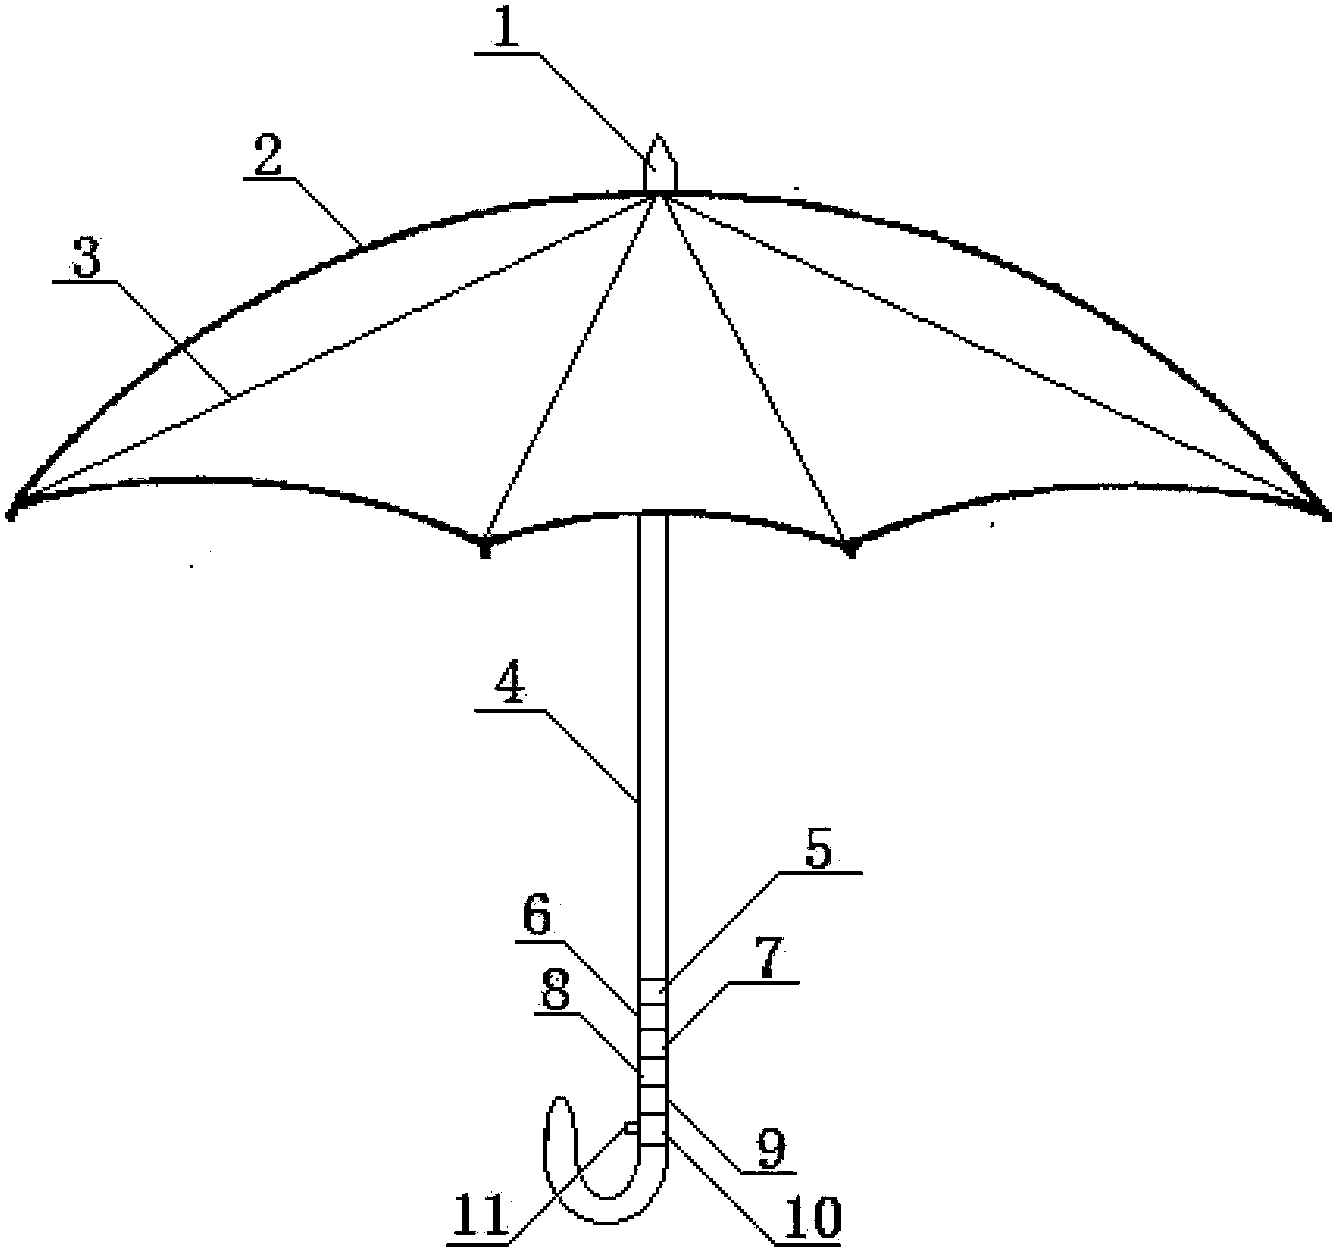 Umbrella structure capable of playing songs